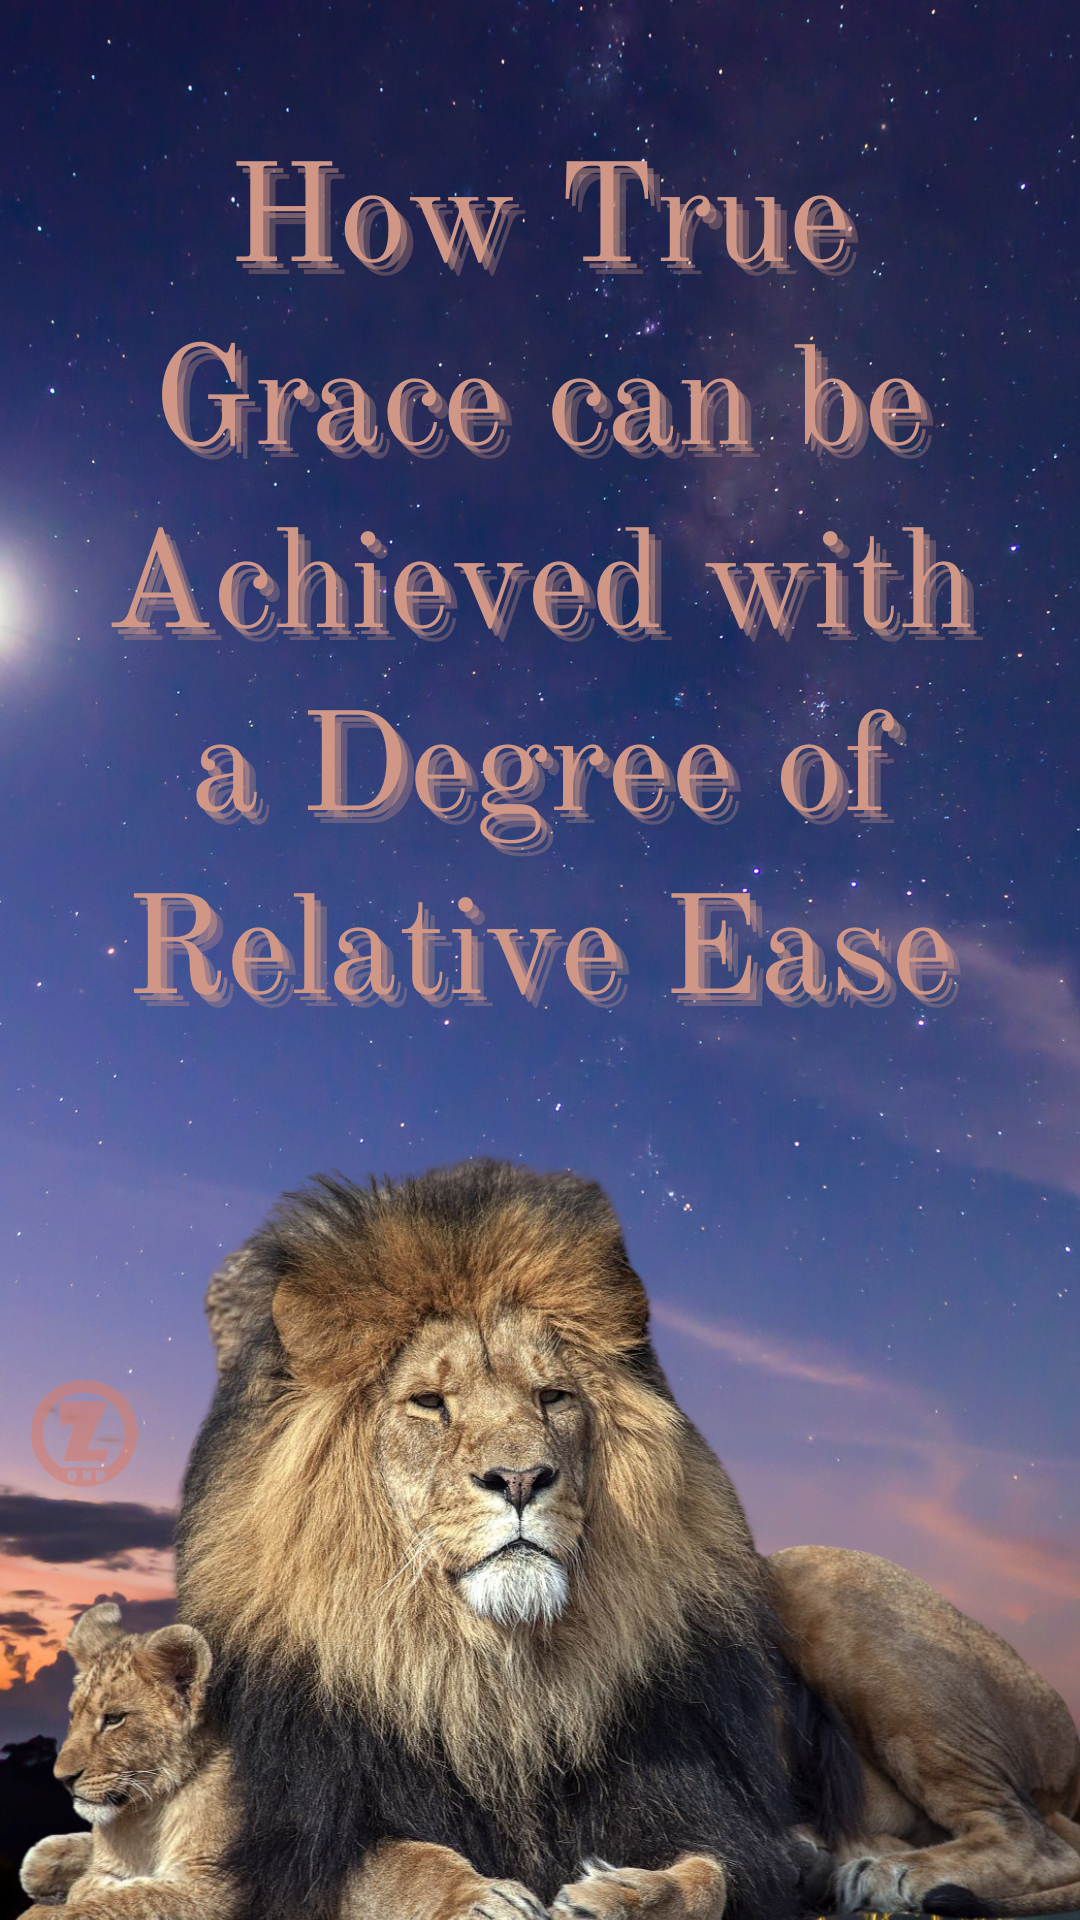 You are currently viewing How True Grace can be Achieved with a Degree of Relative Ease – Step 8